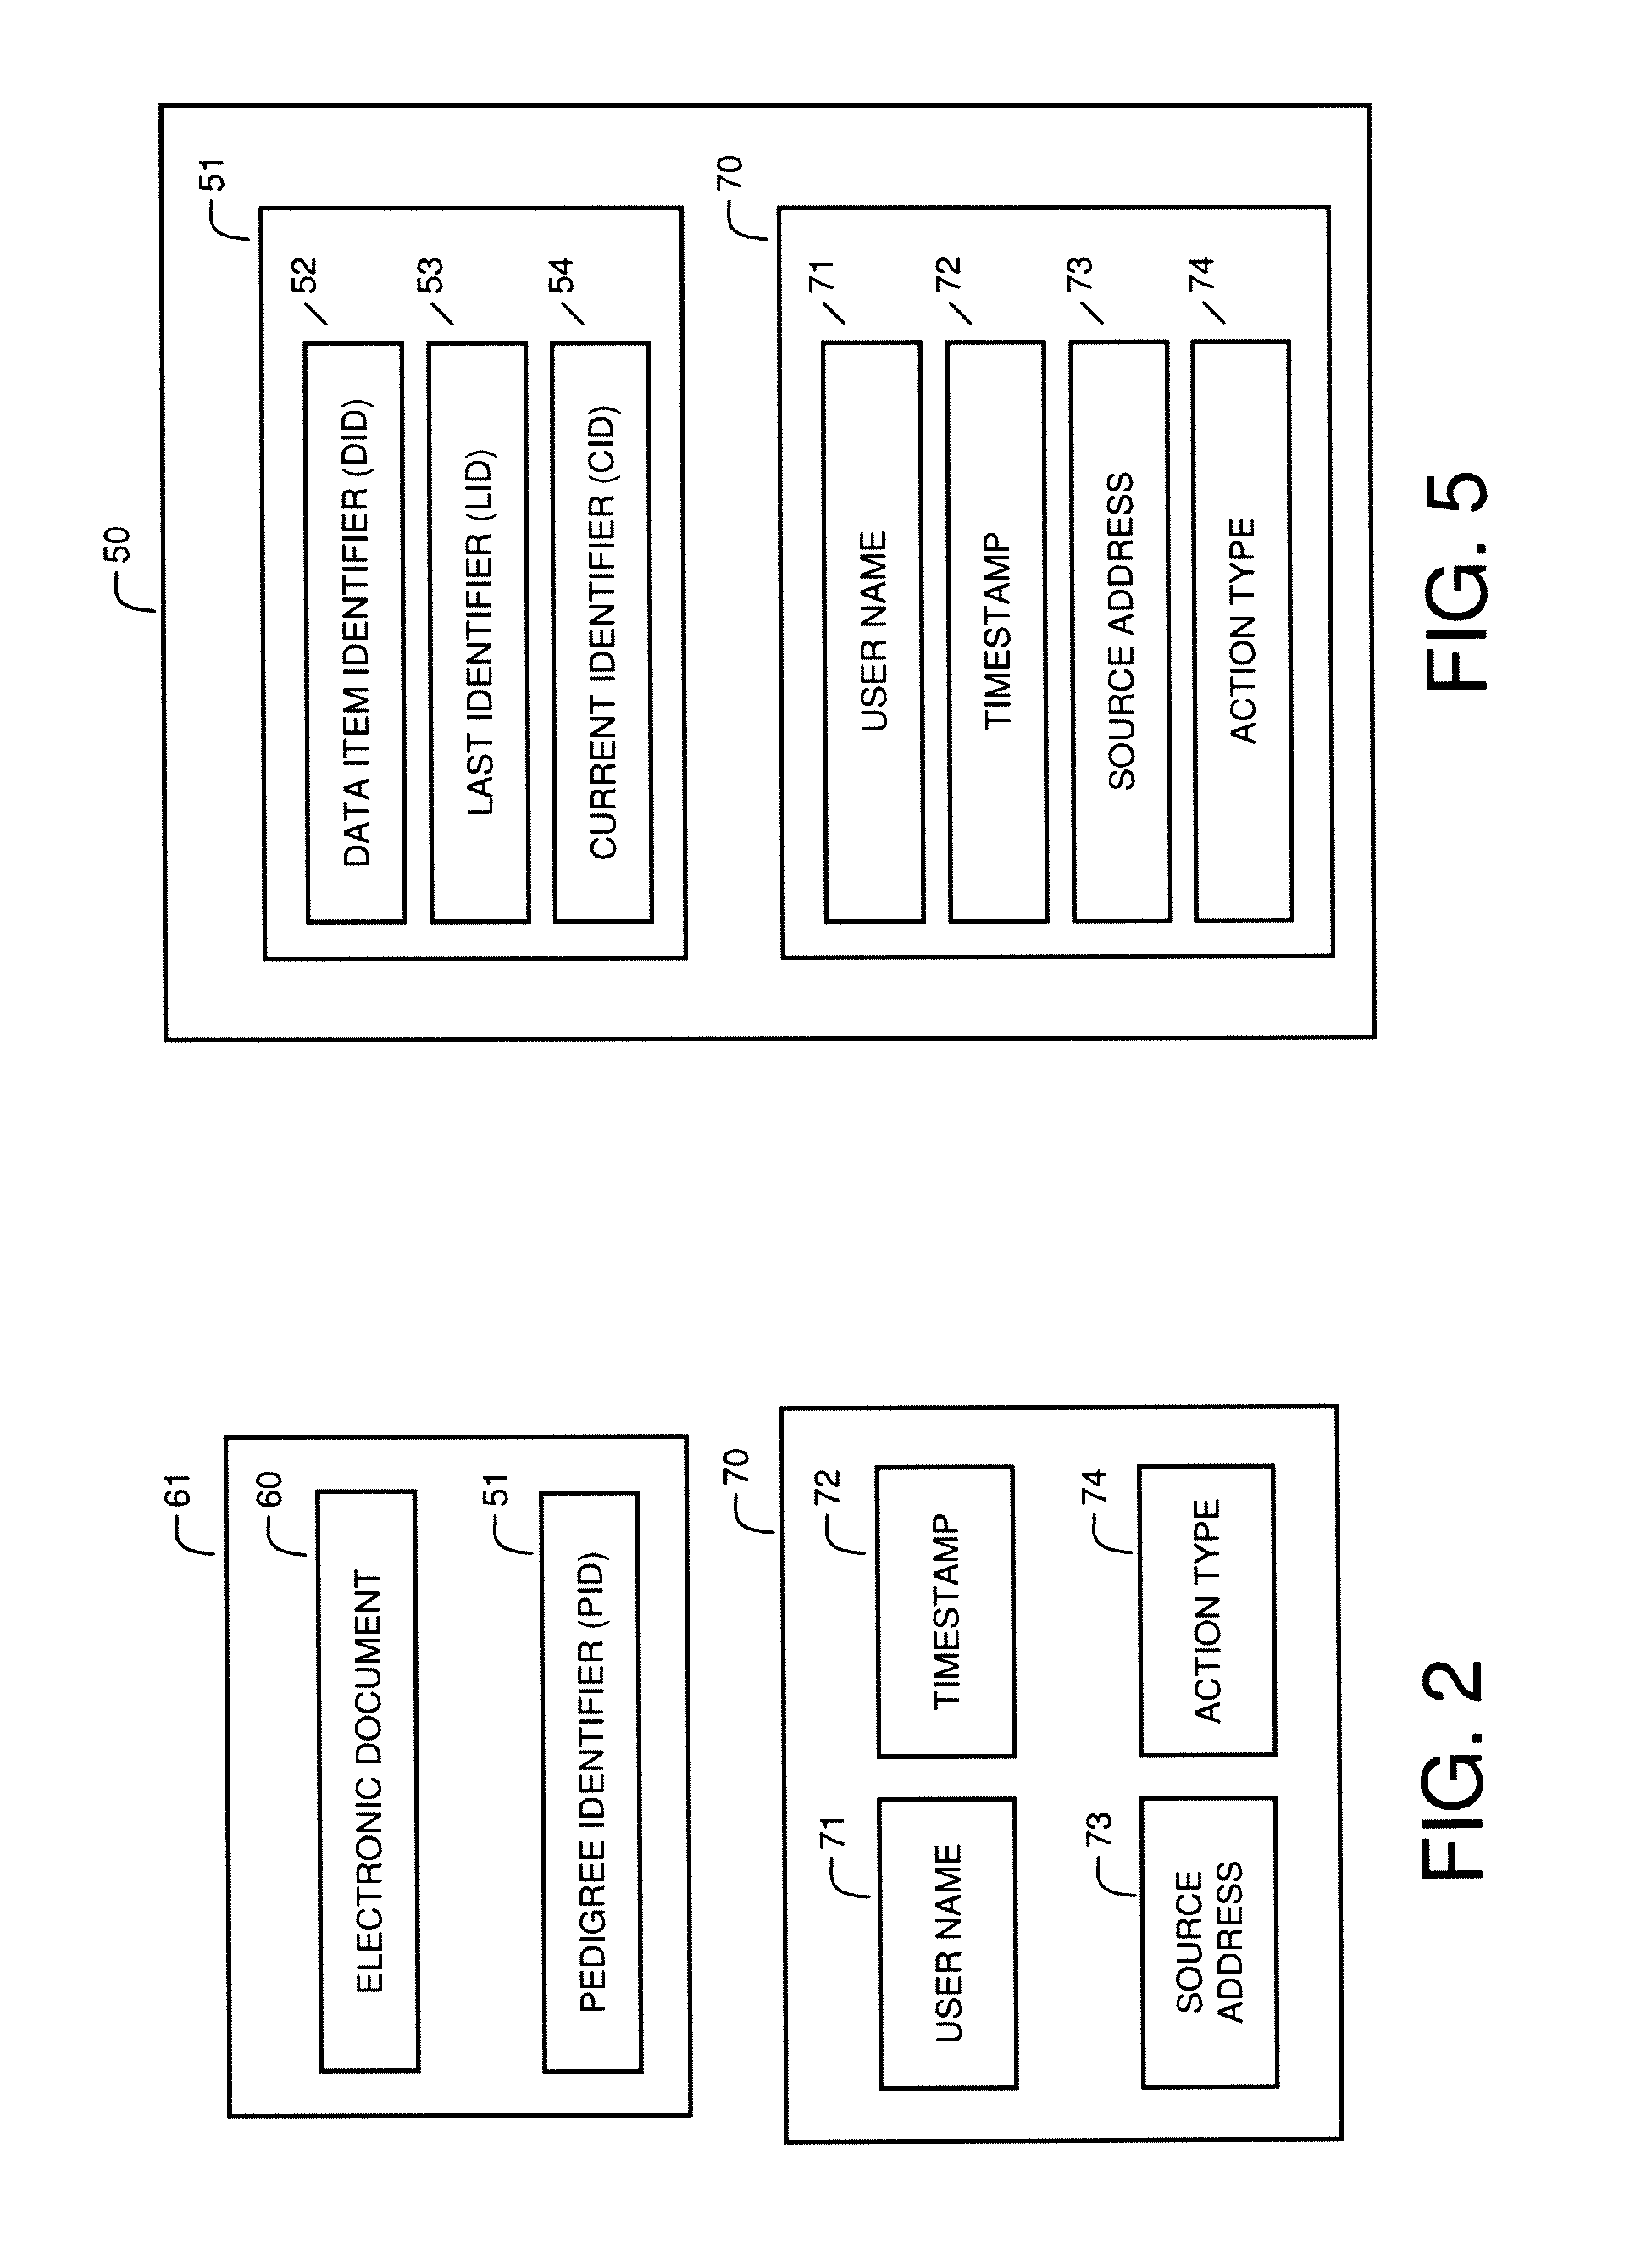 Systems and methods for managing document pedigrees